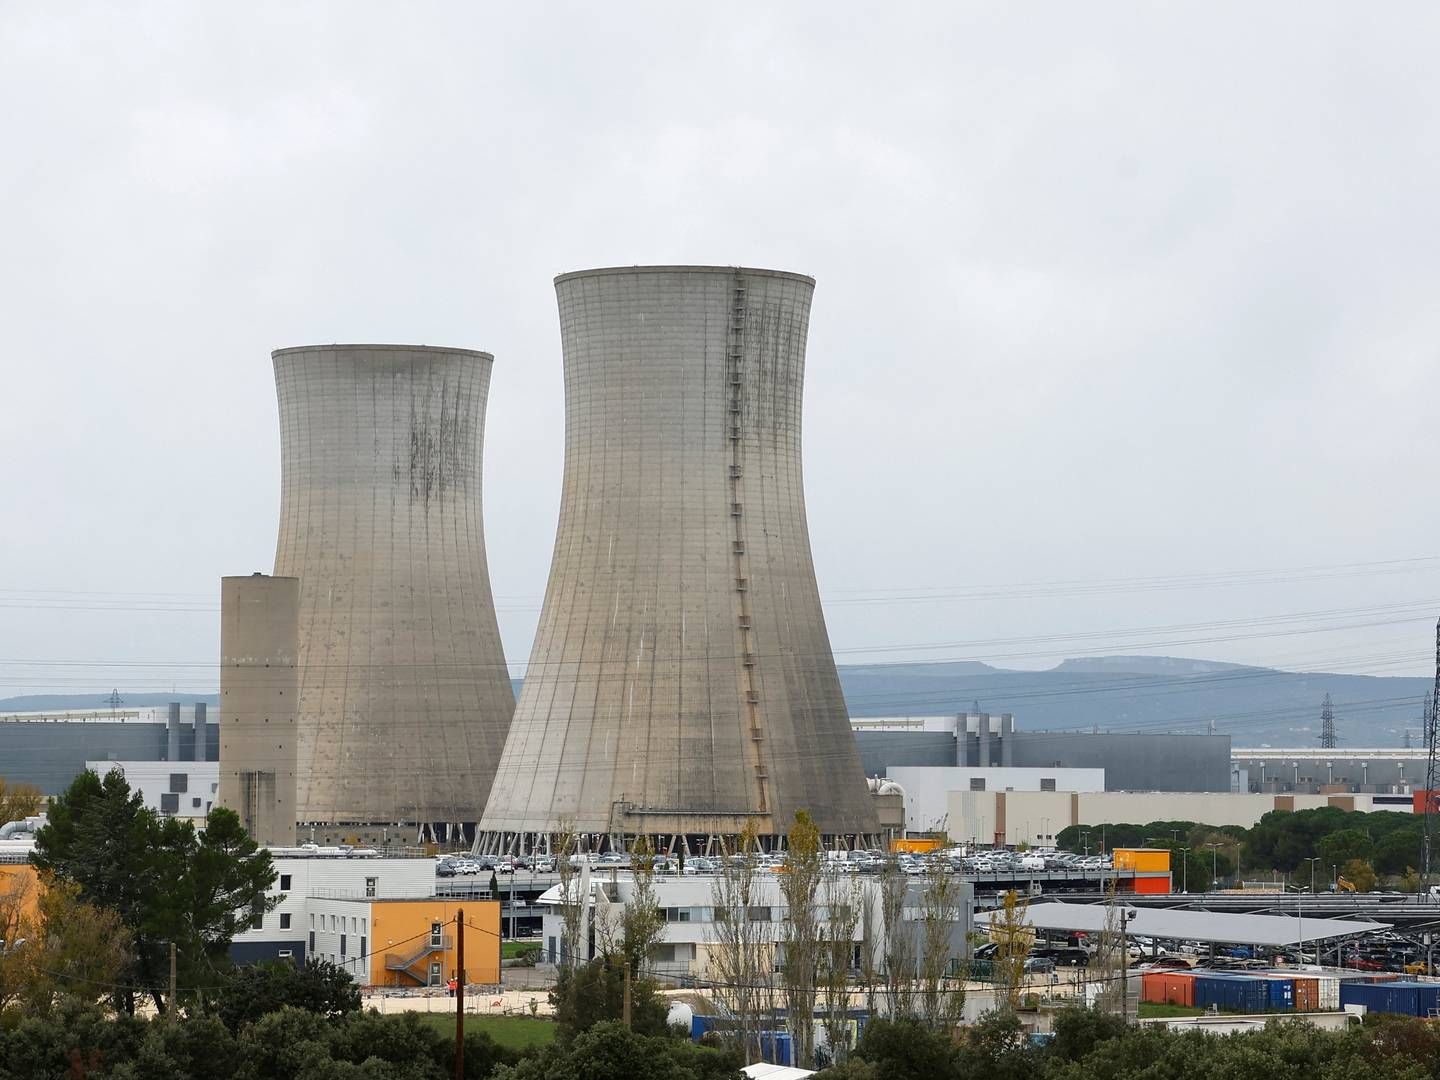 EDF has experienced an unprecedented number of outages at several nuclear reactors, sending nuclear power generation to a 30-year low. | Photo: ERIC GAILLARD/REUTERS / X00102